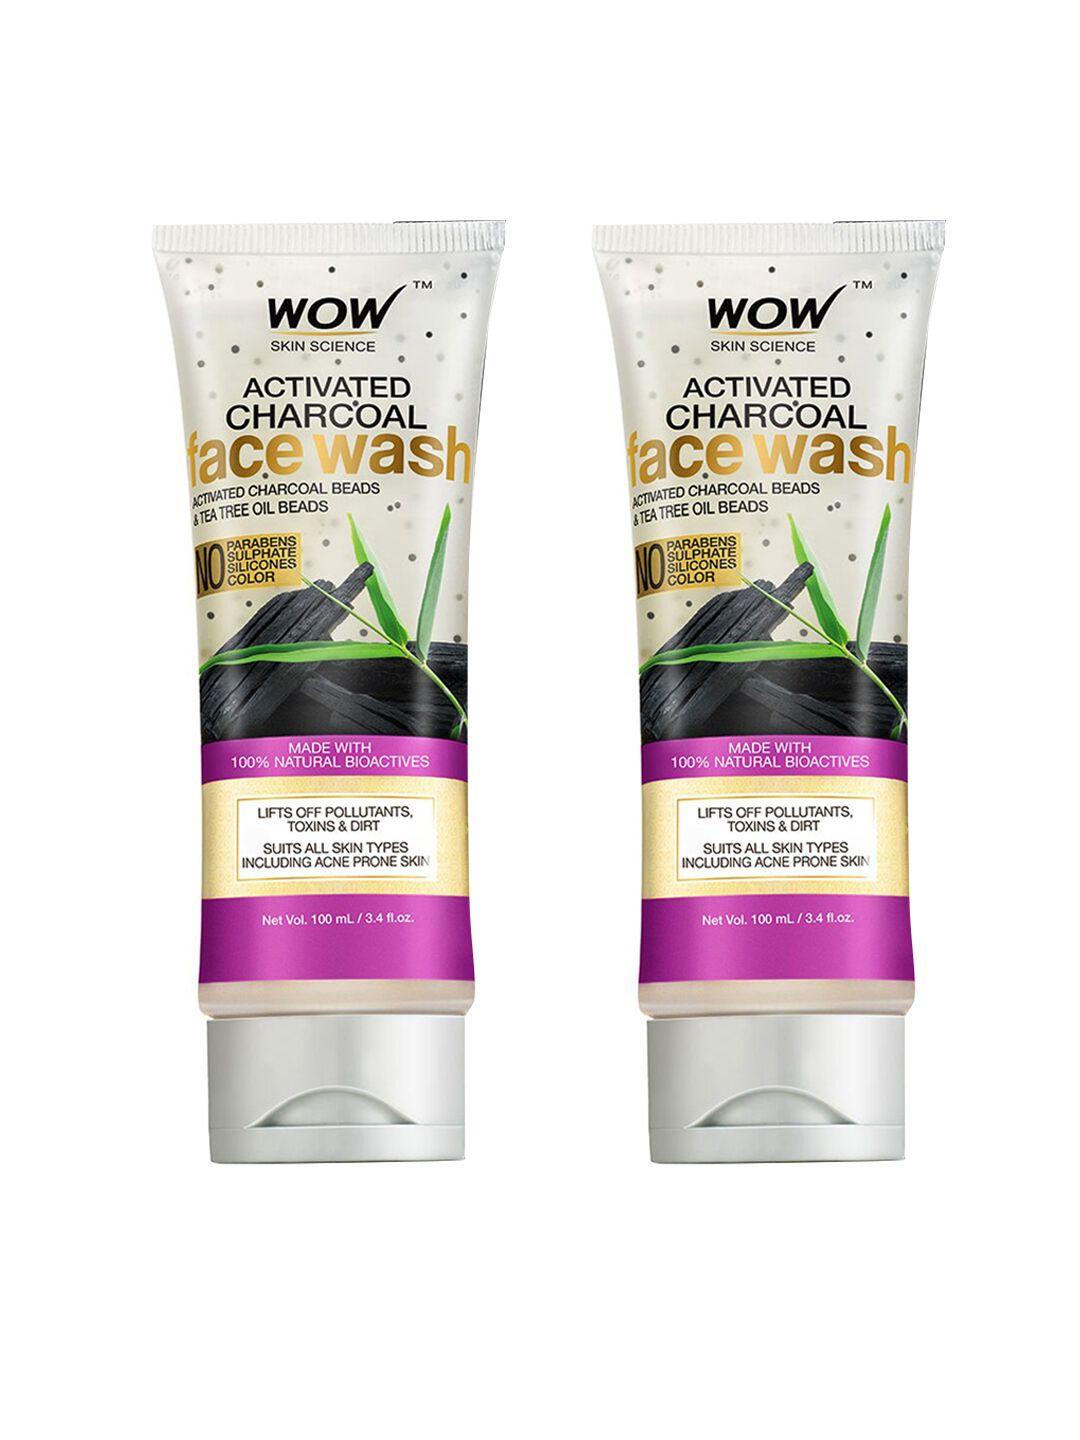 wow skin science set of 2 activated charcoal face wash - 100 ml each